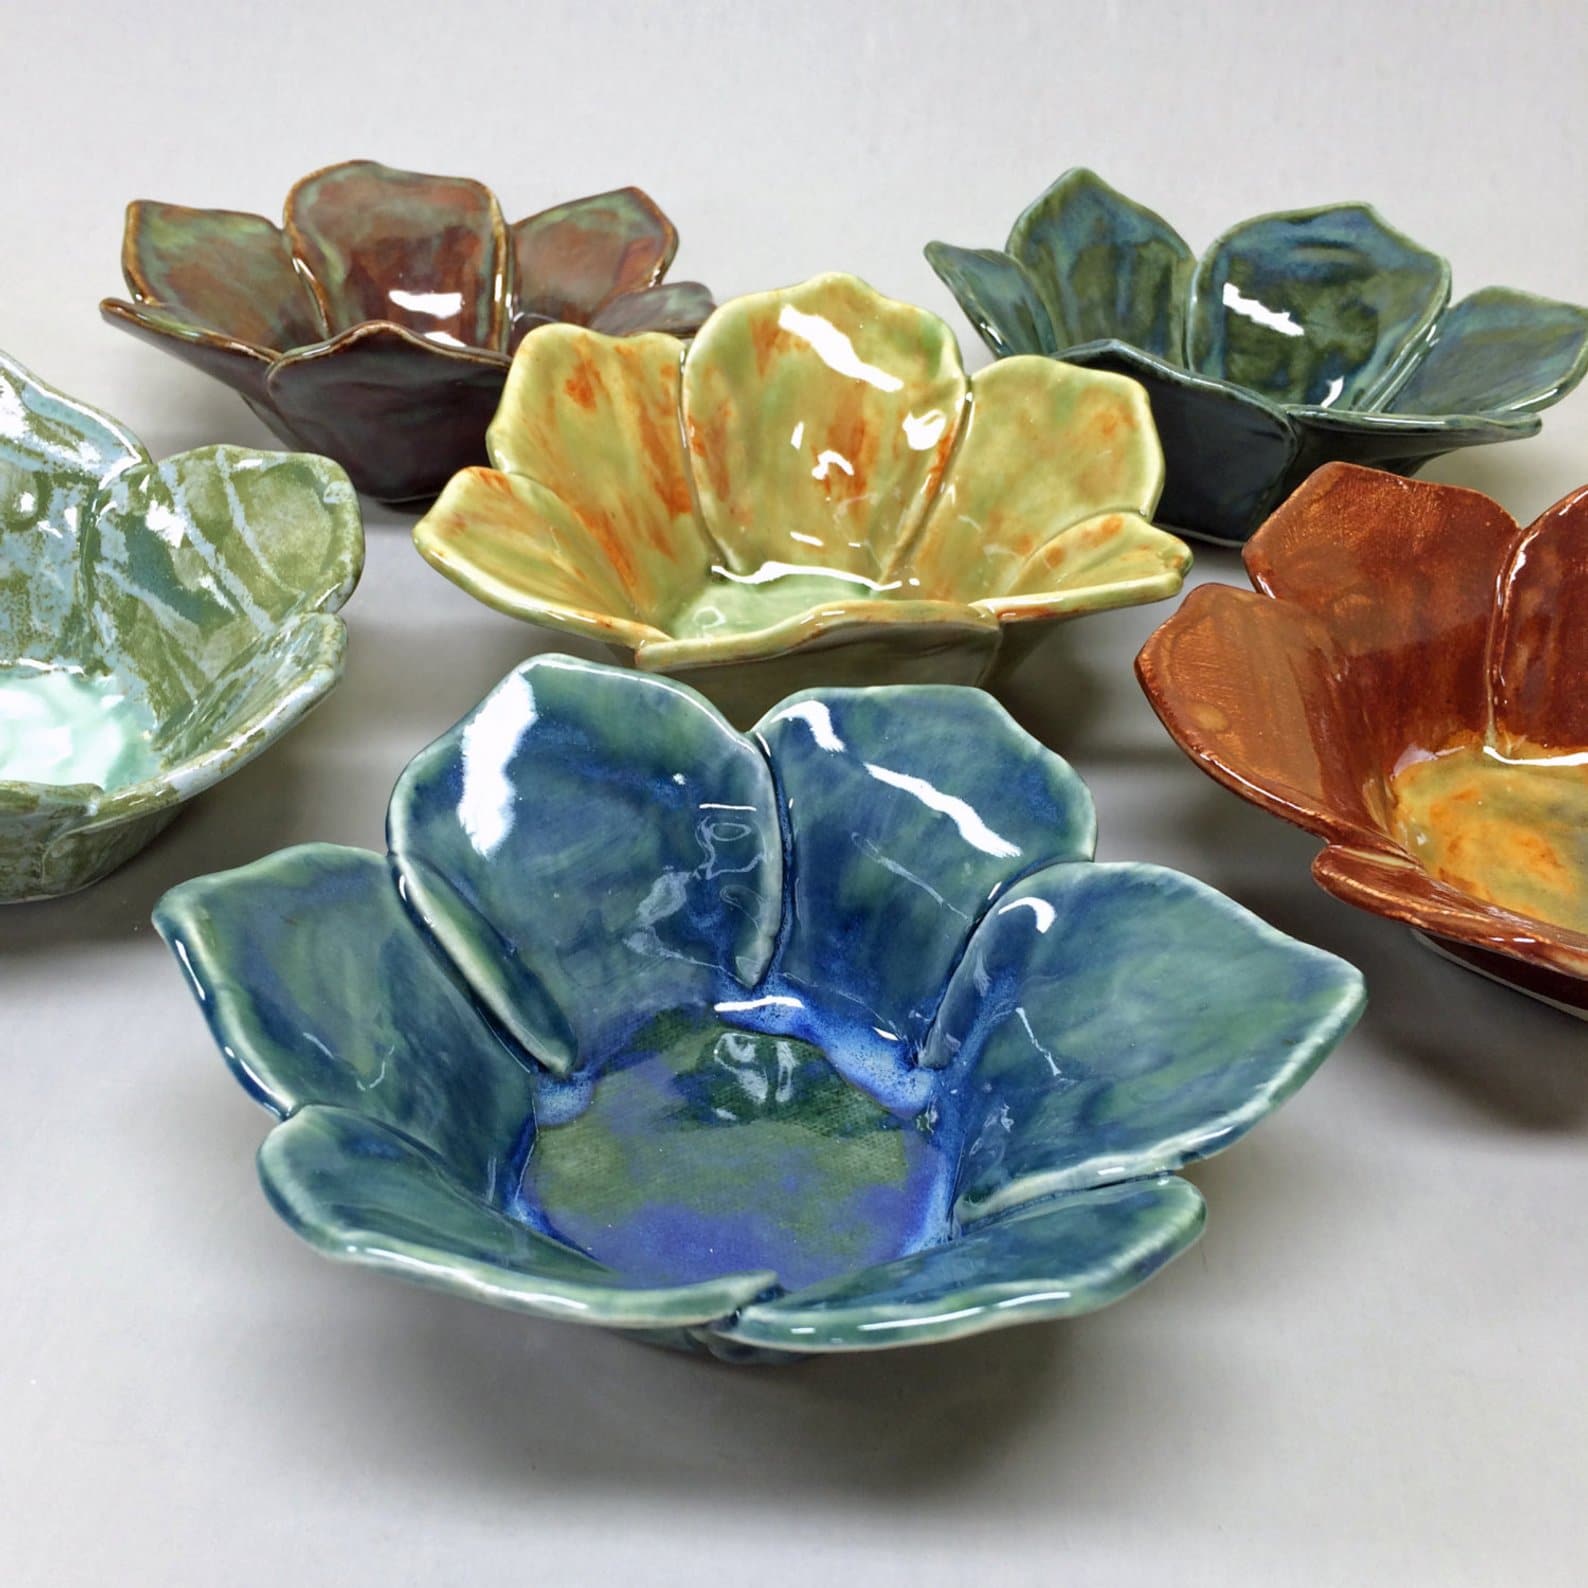 Birmingham, Etsy, LindseyKellyPottery, bowls, pottery, ceramics, ceramic bowls, flowers, Mother's Day, gifts